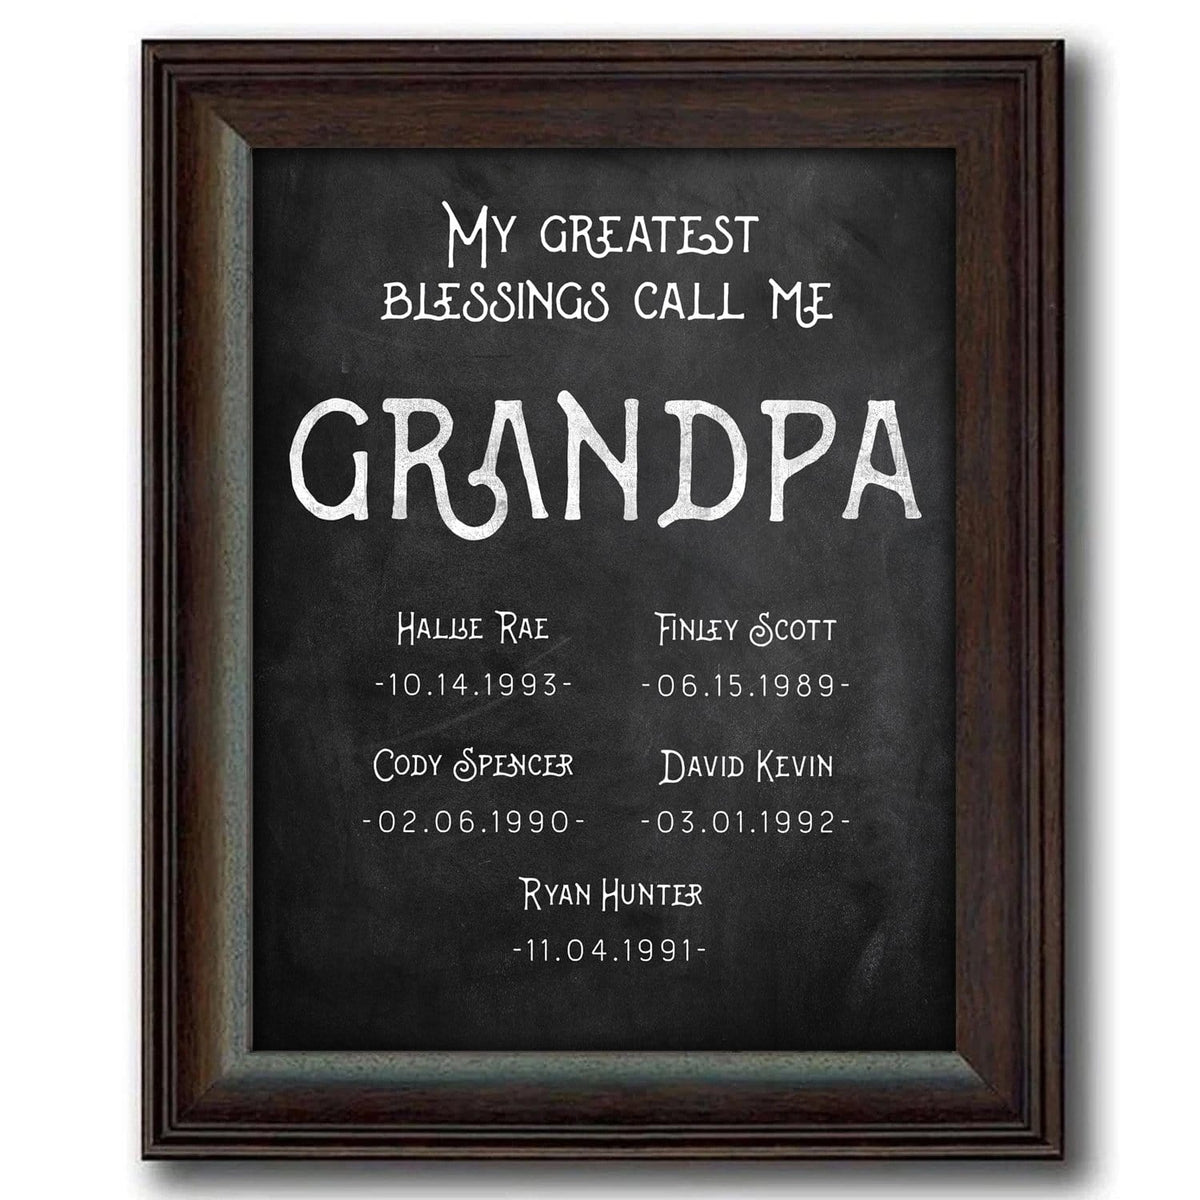 Personalized Gift for Grandpa from Personal Prints - Framed Under Glass Option